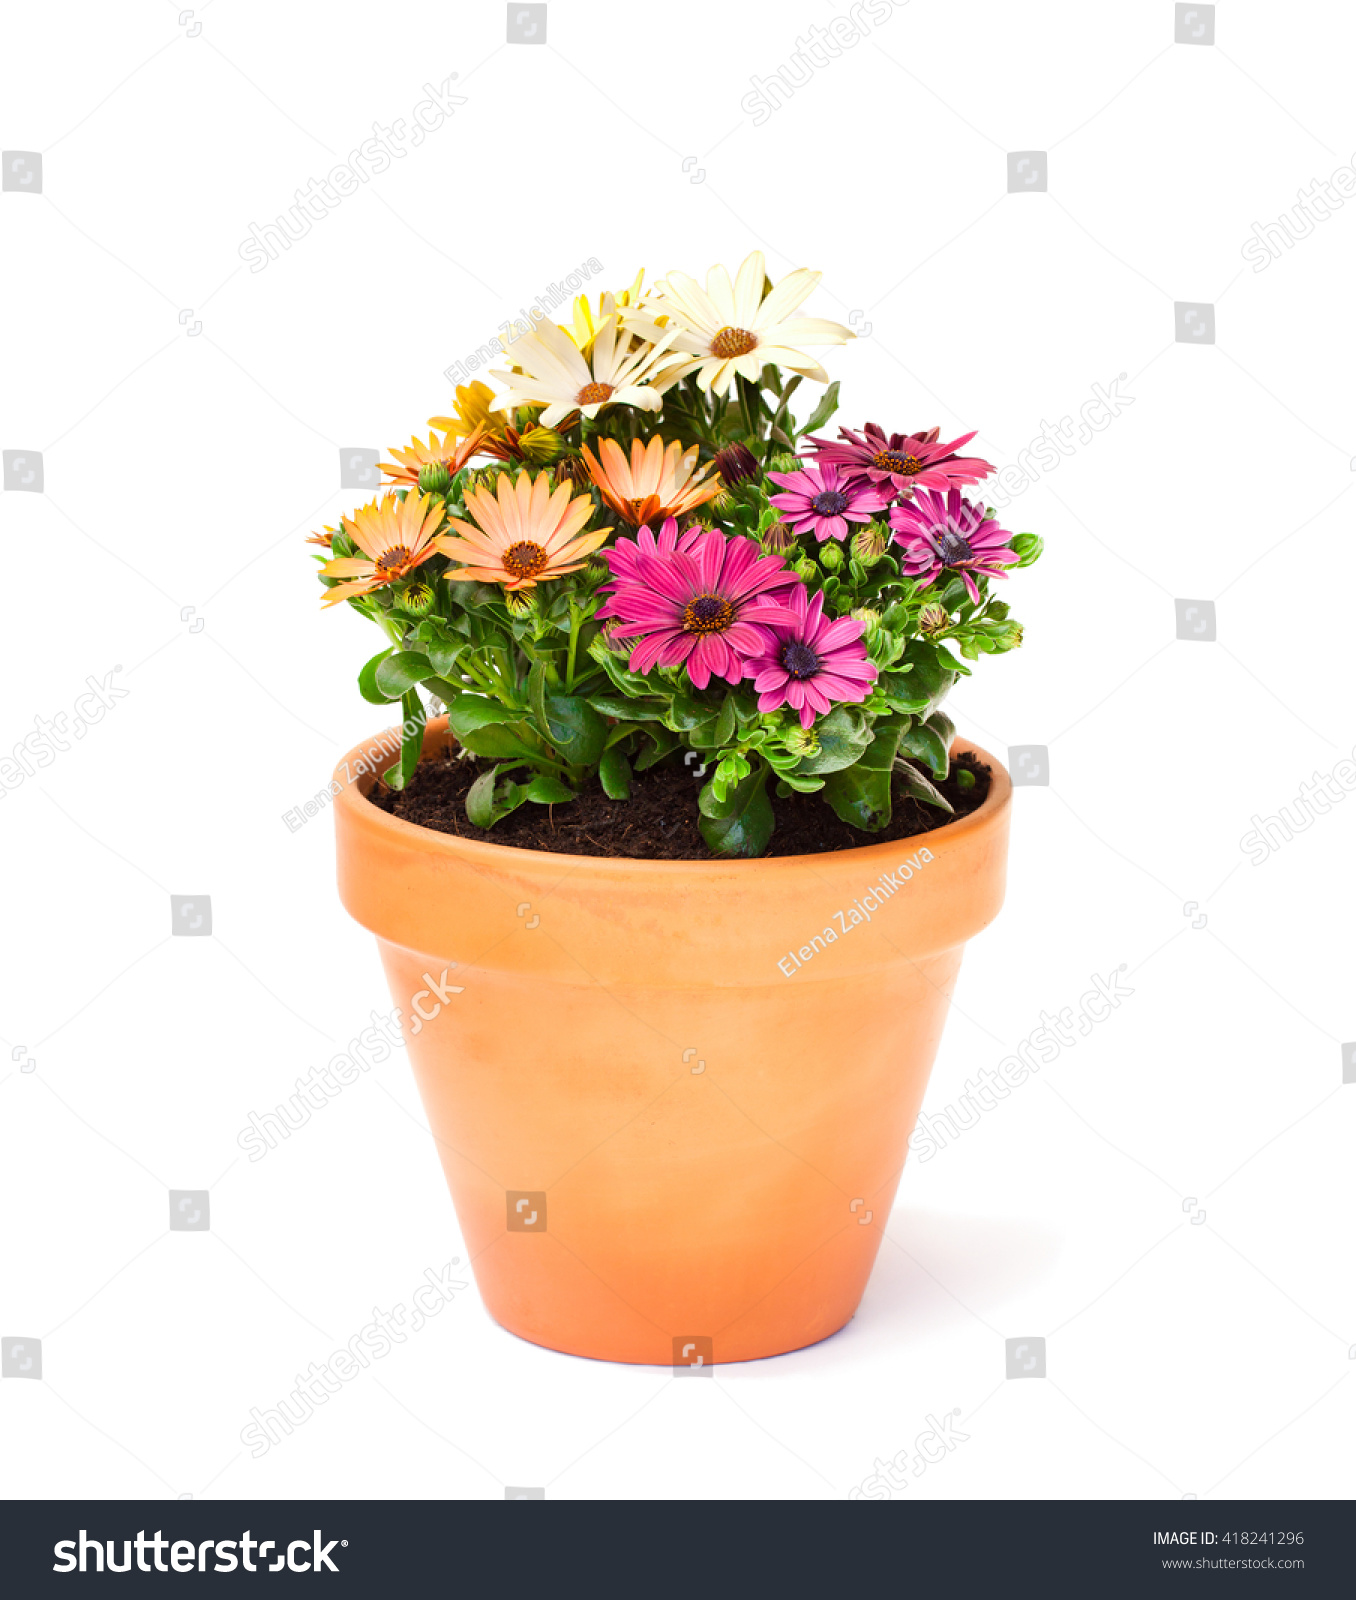 Colorful  cape daisy flowers in a ceramic flowerpot isolated  #418241296